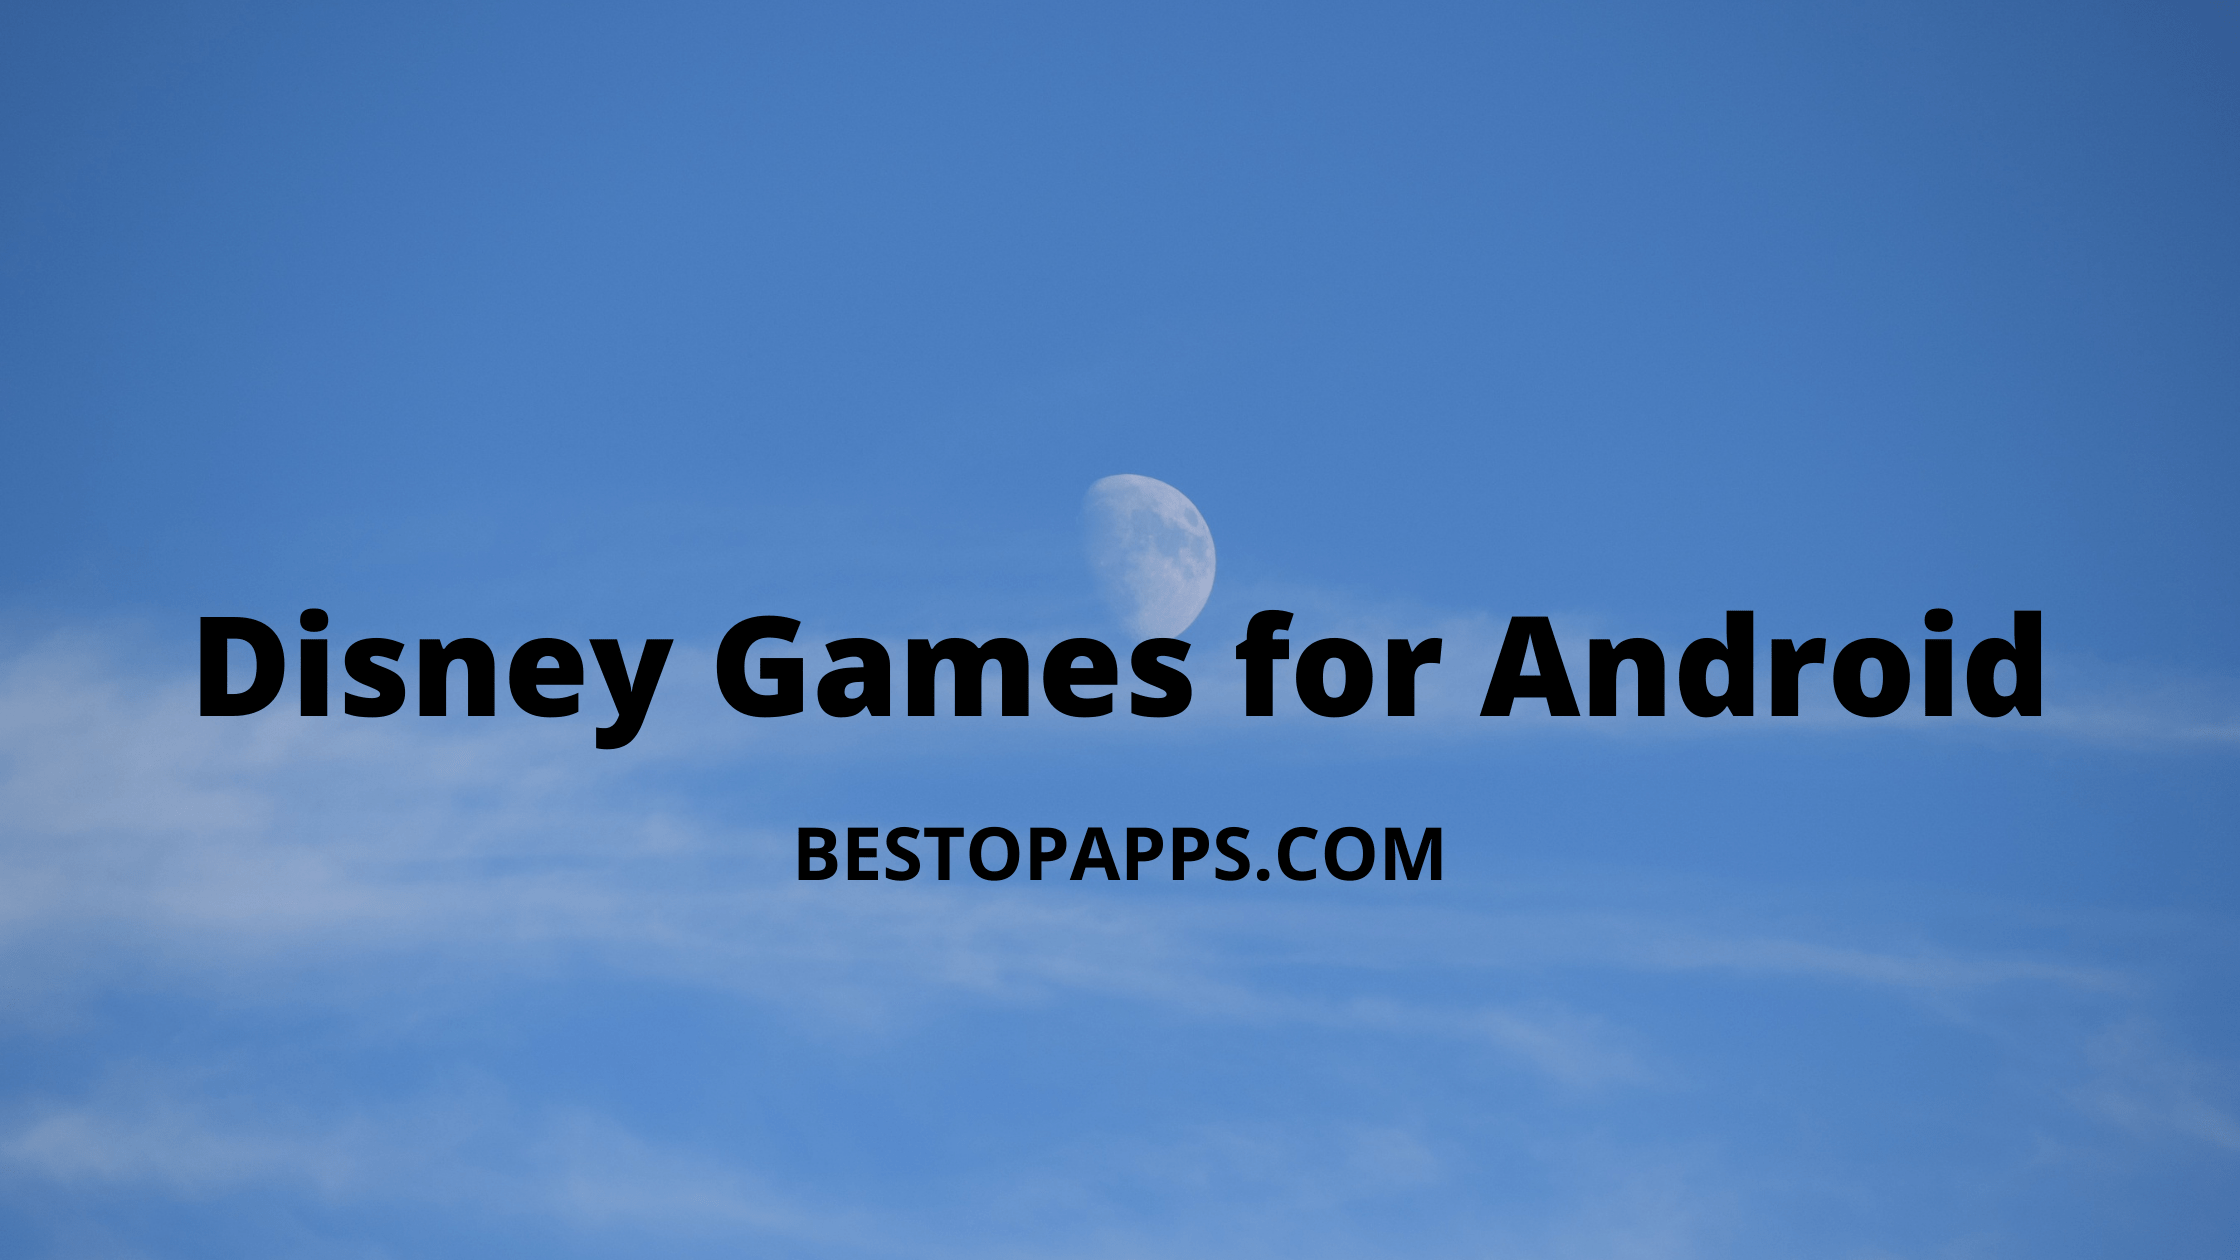 Disney Games for Android